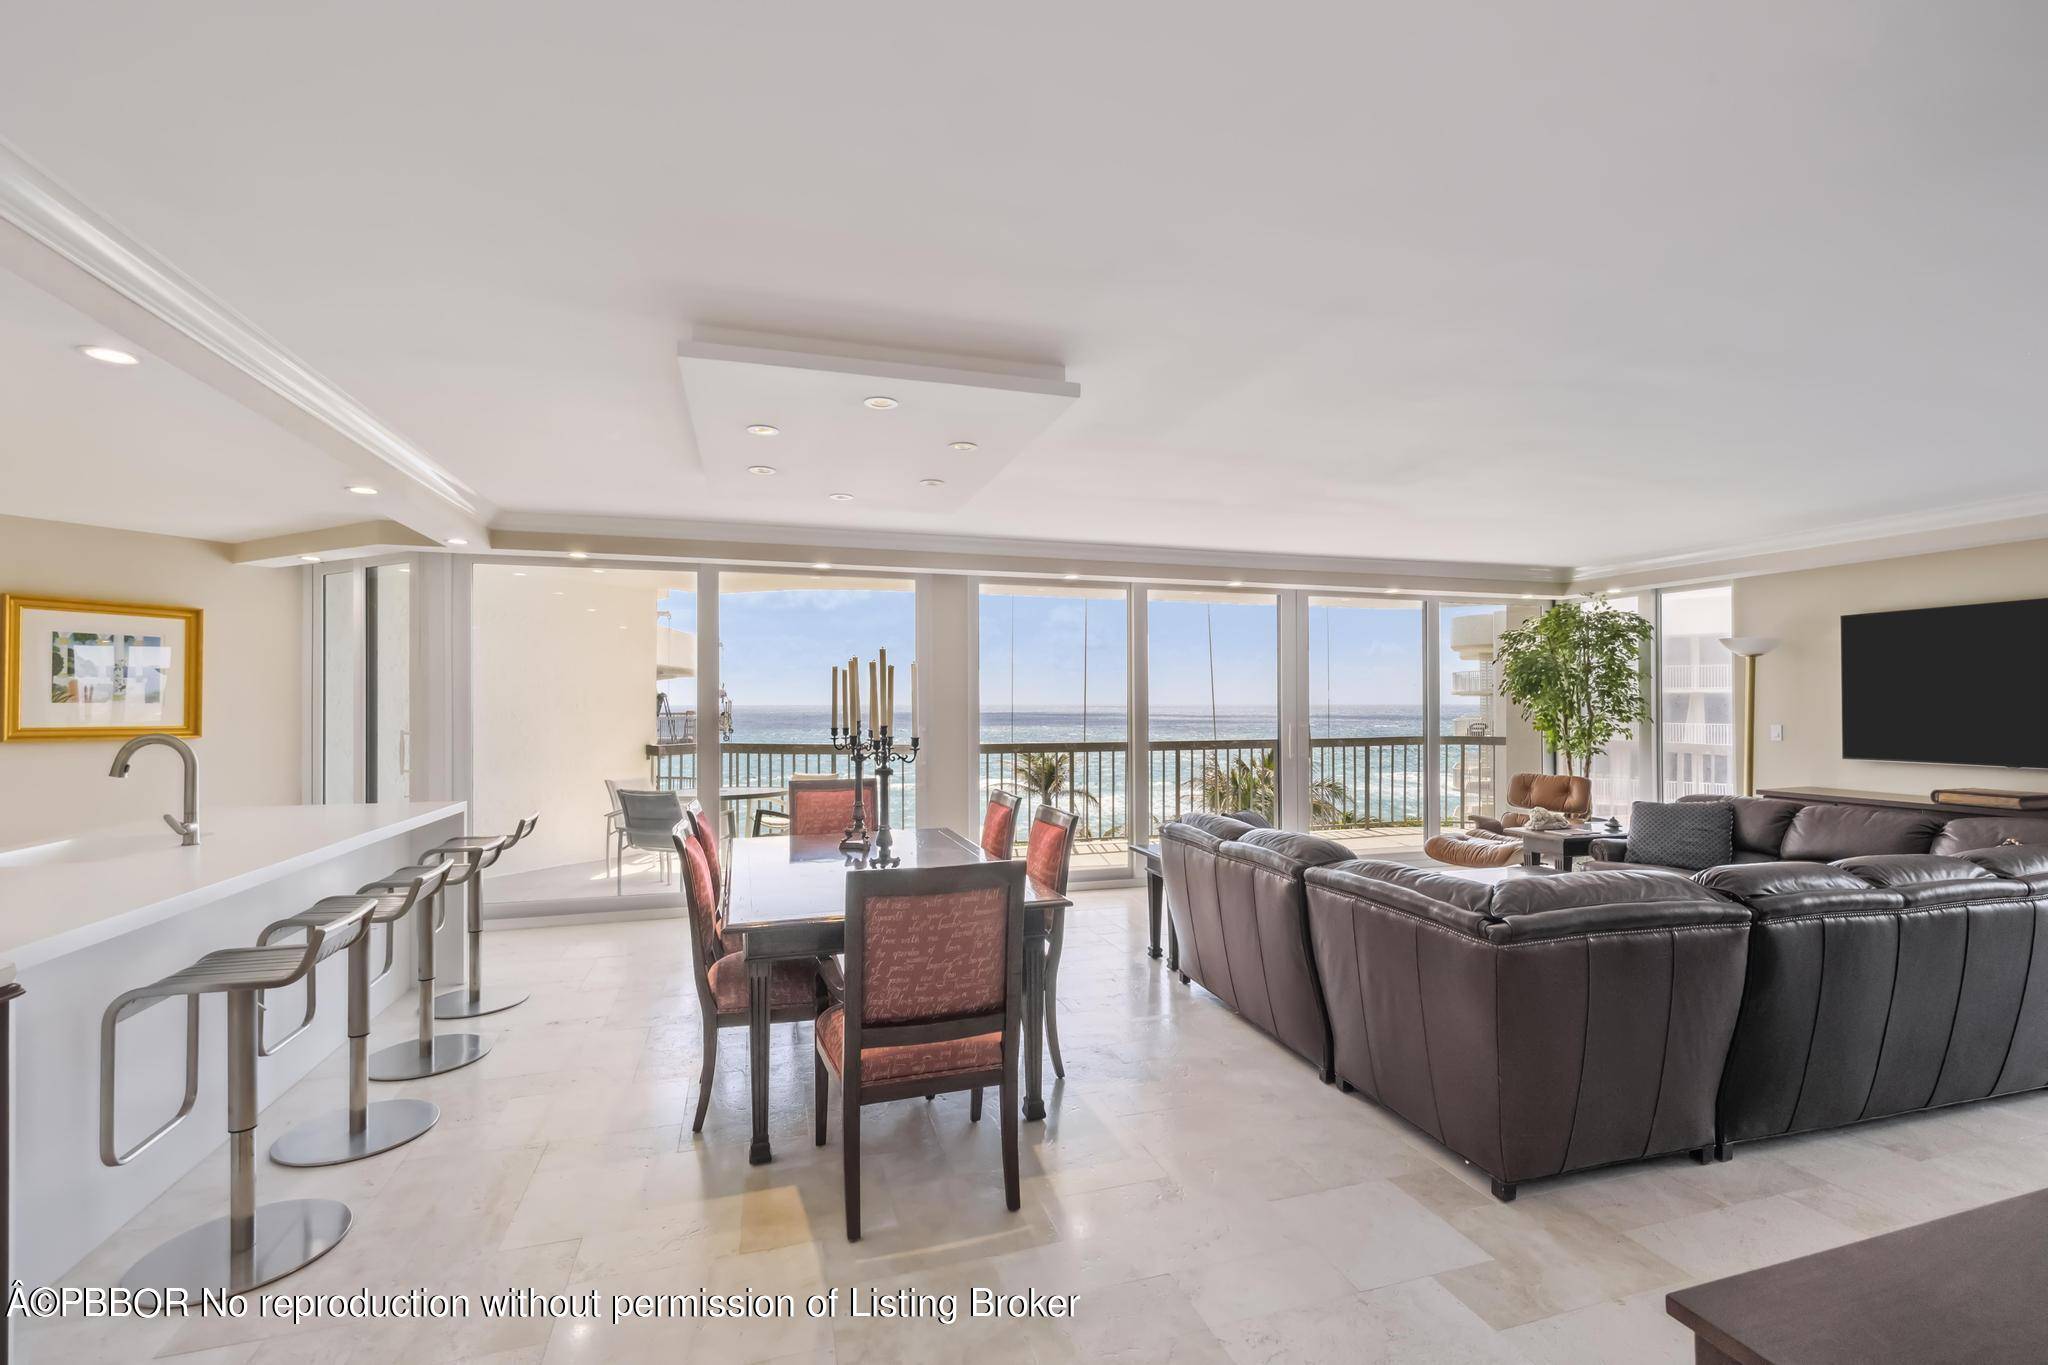 OCEANFRONT PENTHOUSE WITH BOTH DIRECT OCEAN AND INTRACOASTAL VIEWS INCLUDING 2 BALCONIES.